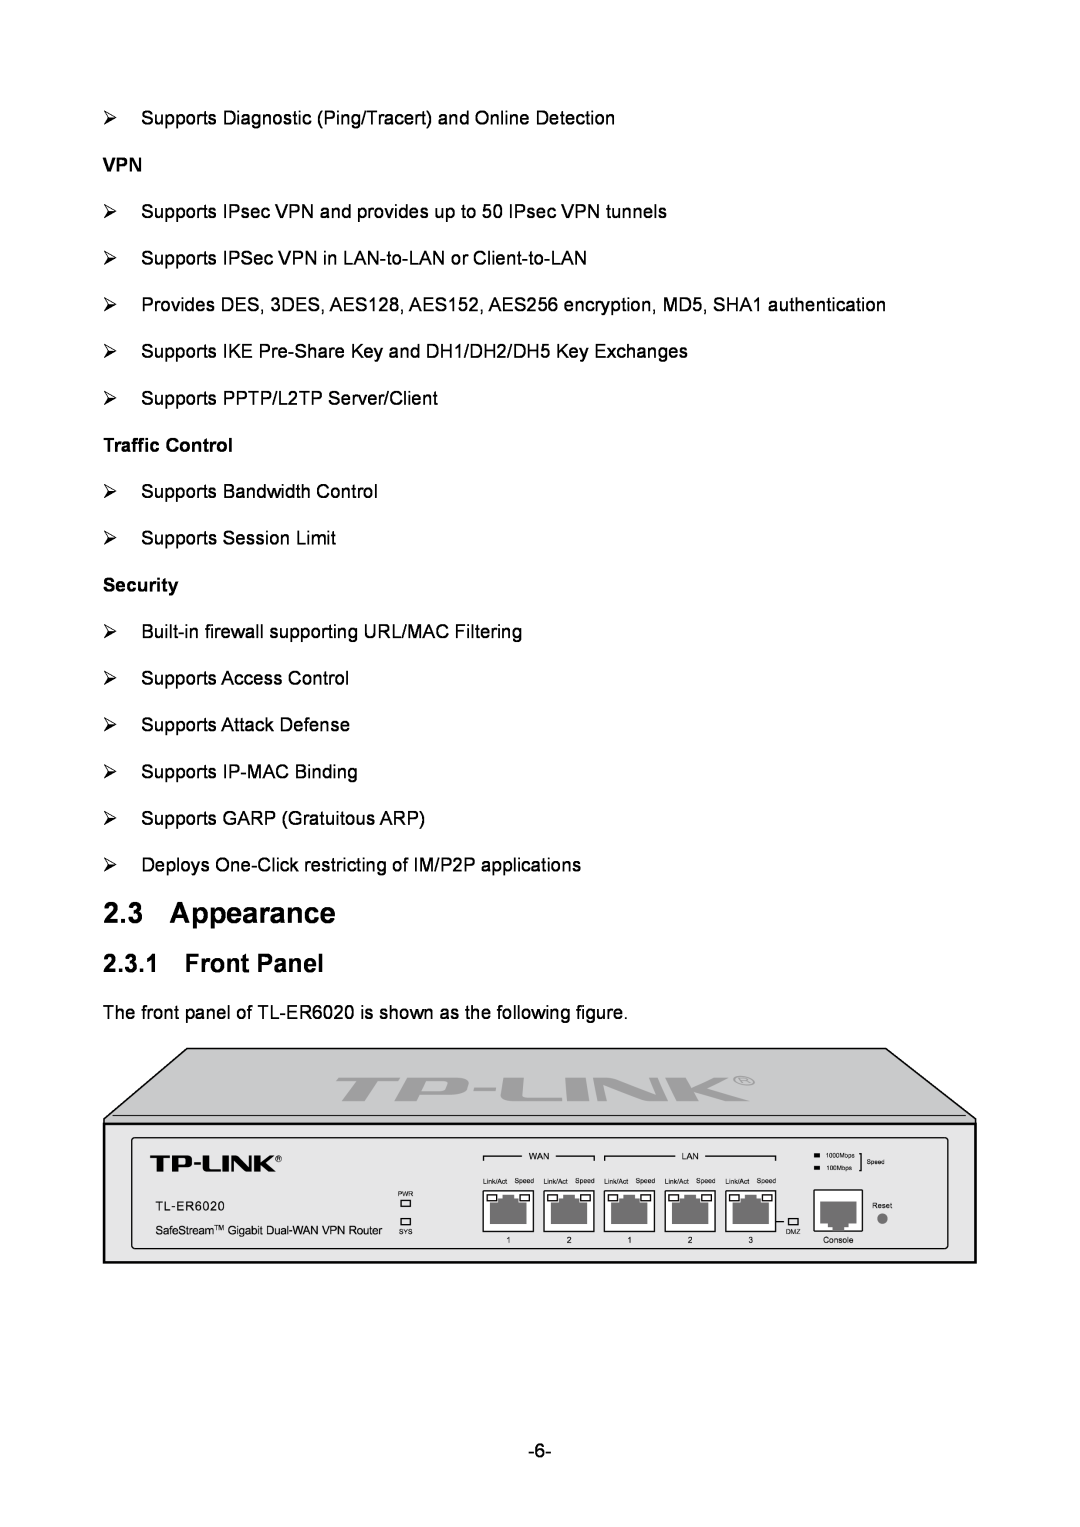 TP-Link TL-ER6020 manual Appearance, Front Panel, Traffic Control, Security 